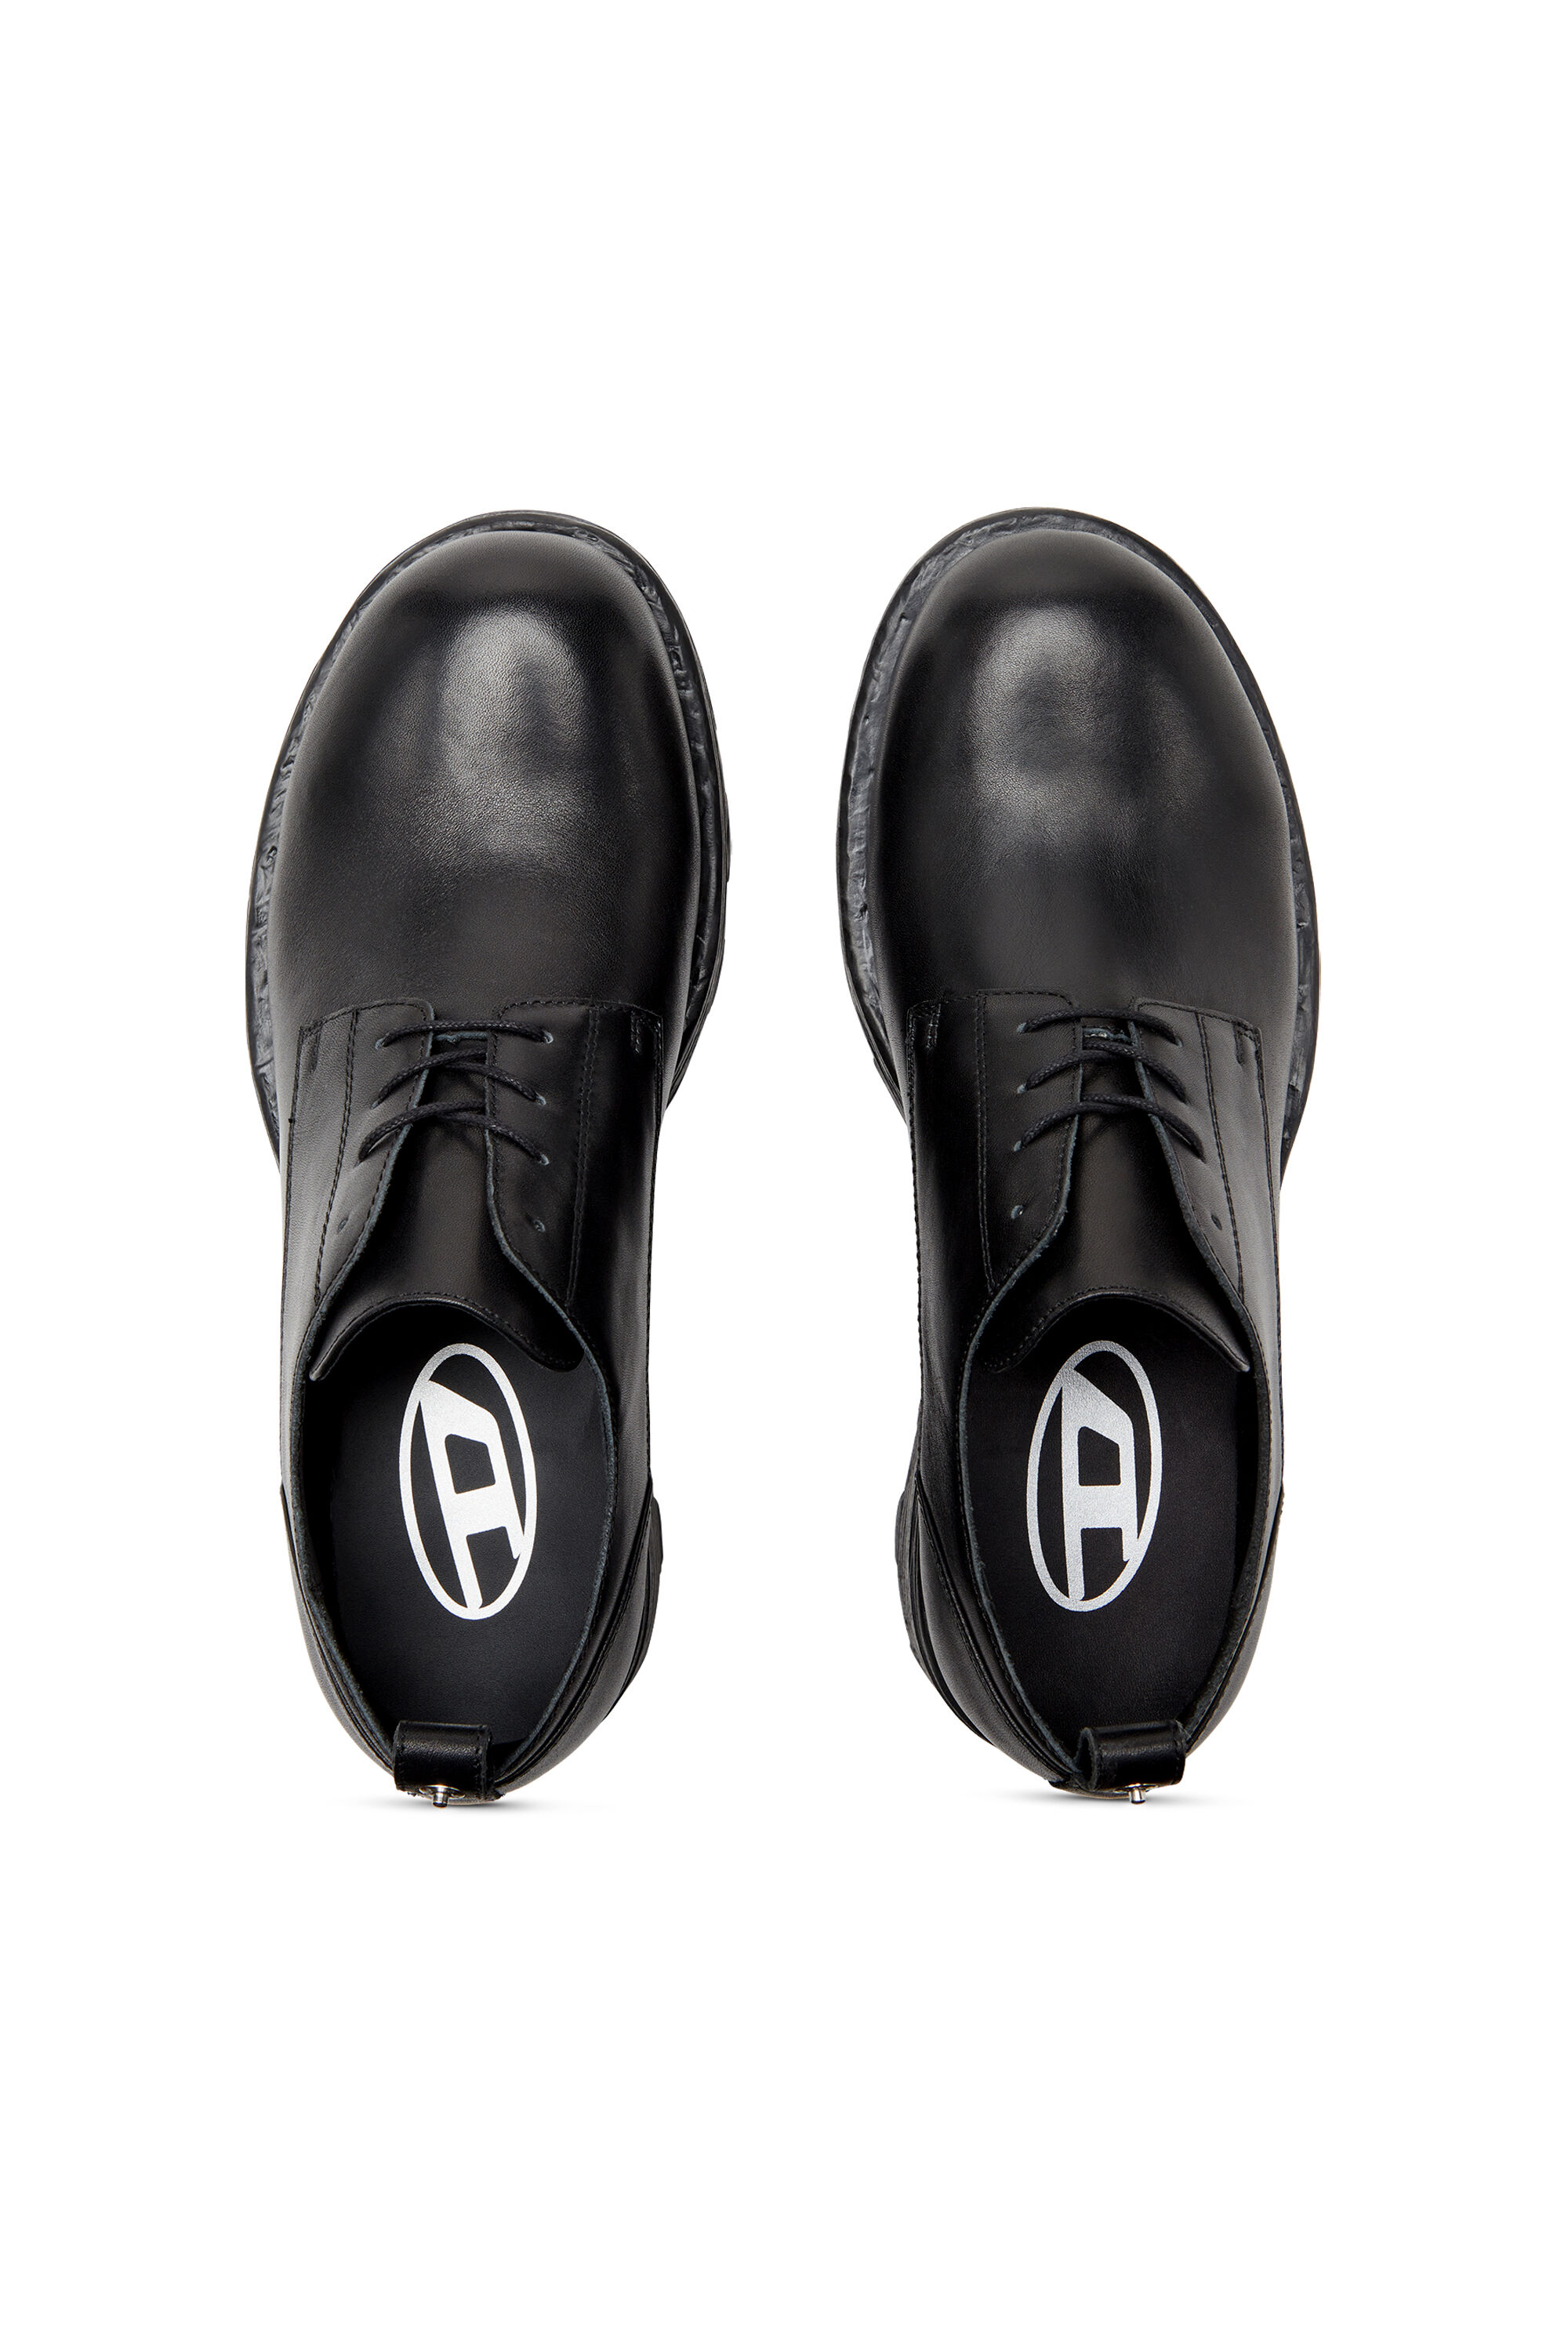 Diesel - D-HAMMER SH, Man D-Hammer-Derby shoes in textured leather in Black - Image 4